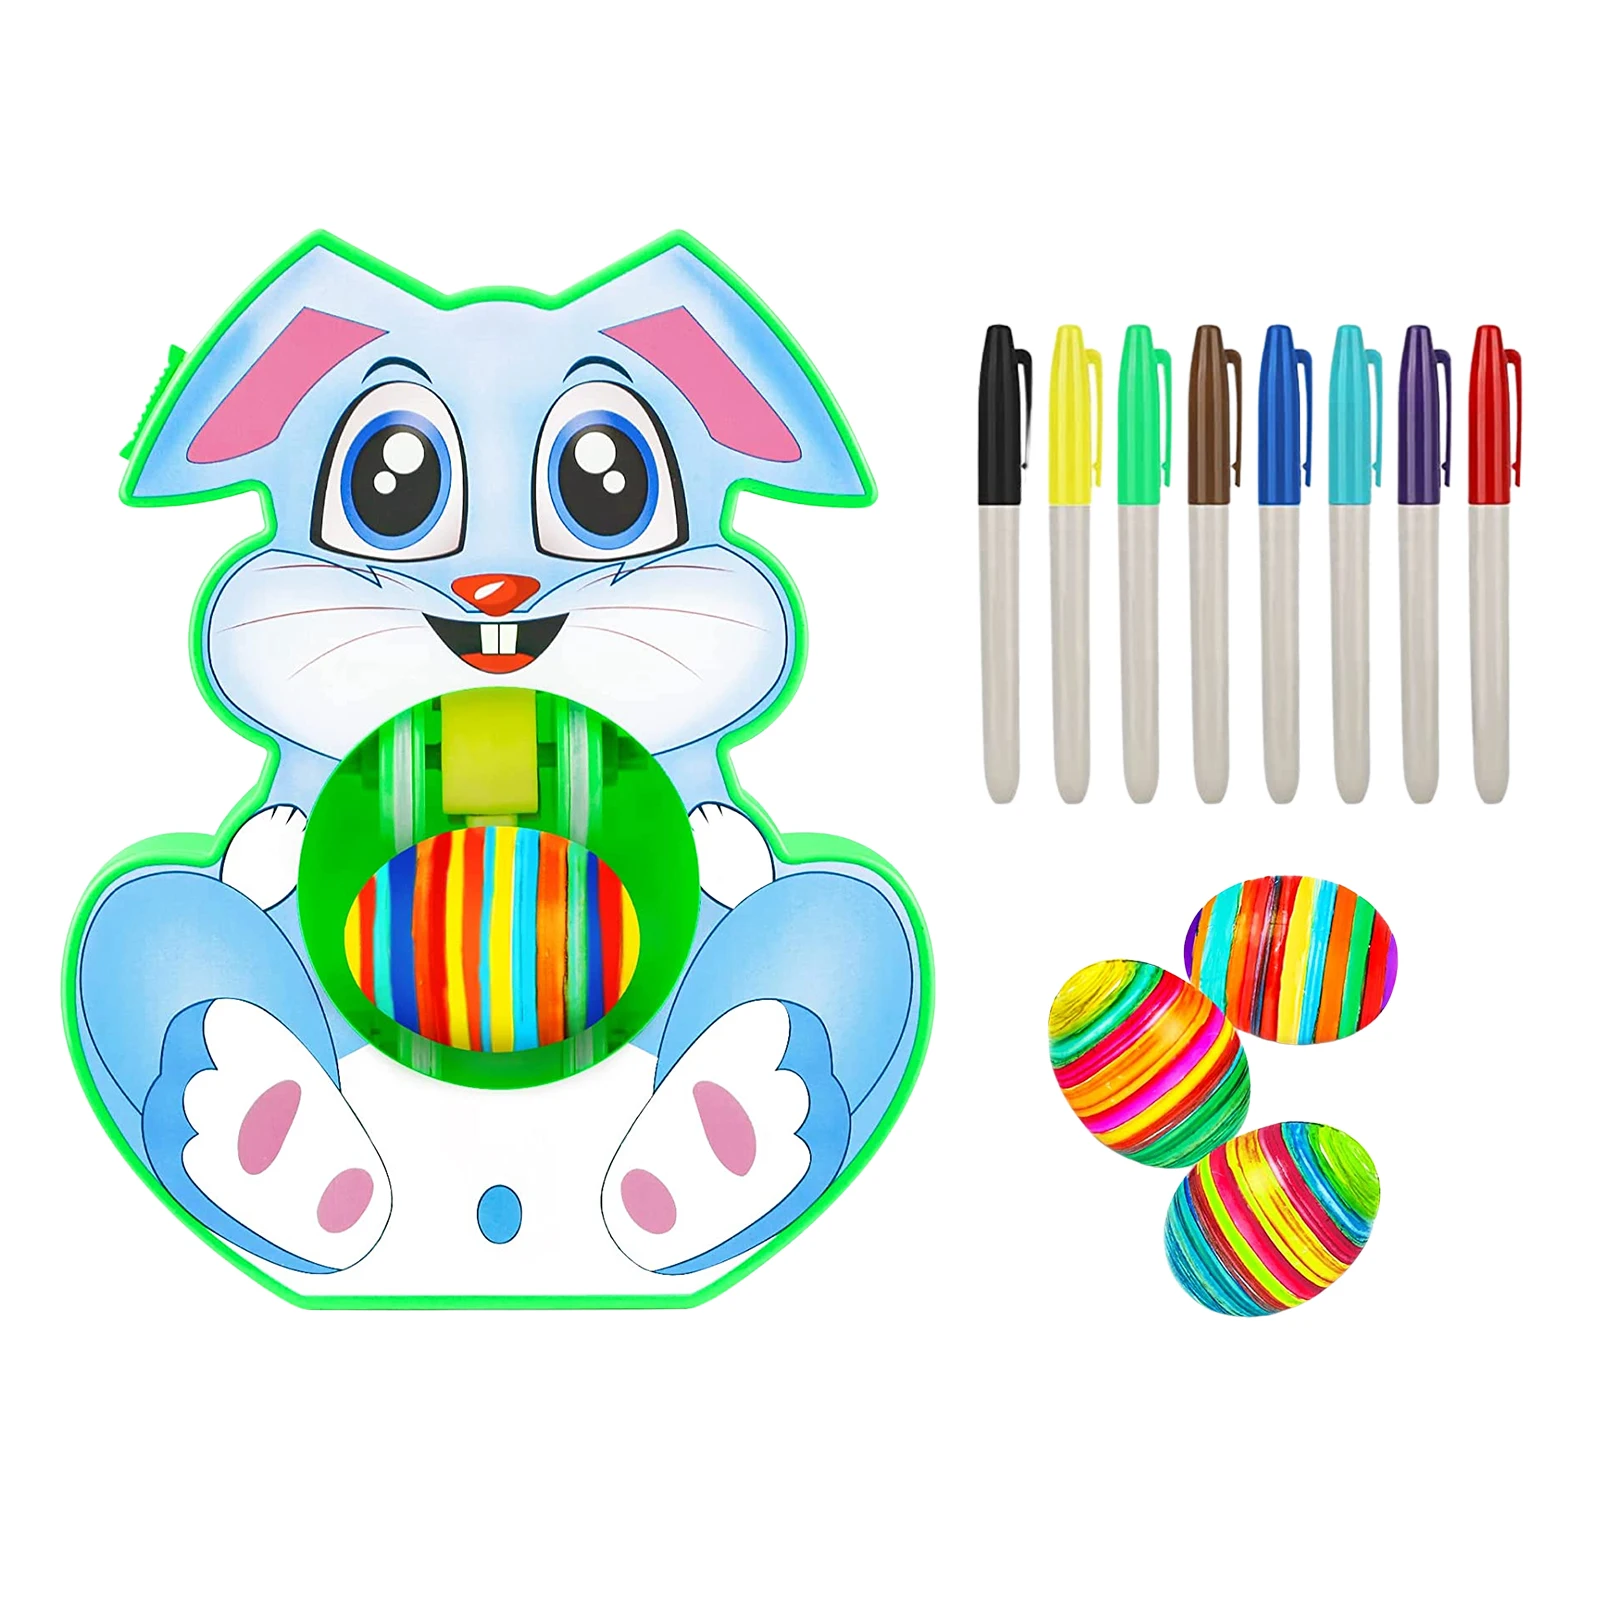 

Easter Egg Decorating Kit Easter Egg Dye Kit Easter Egg Spinner Machine Toy With 3 DYE Eggs 8 Colorful Quick Drying Markers